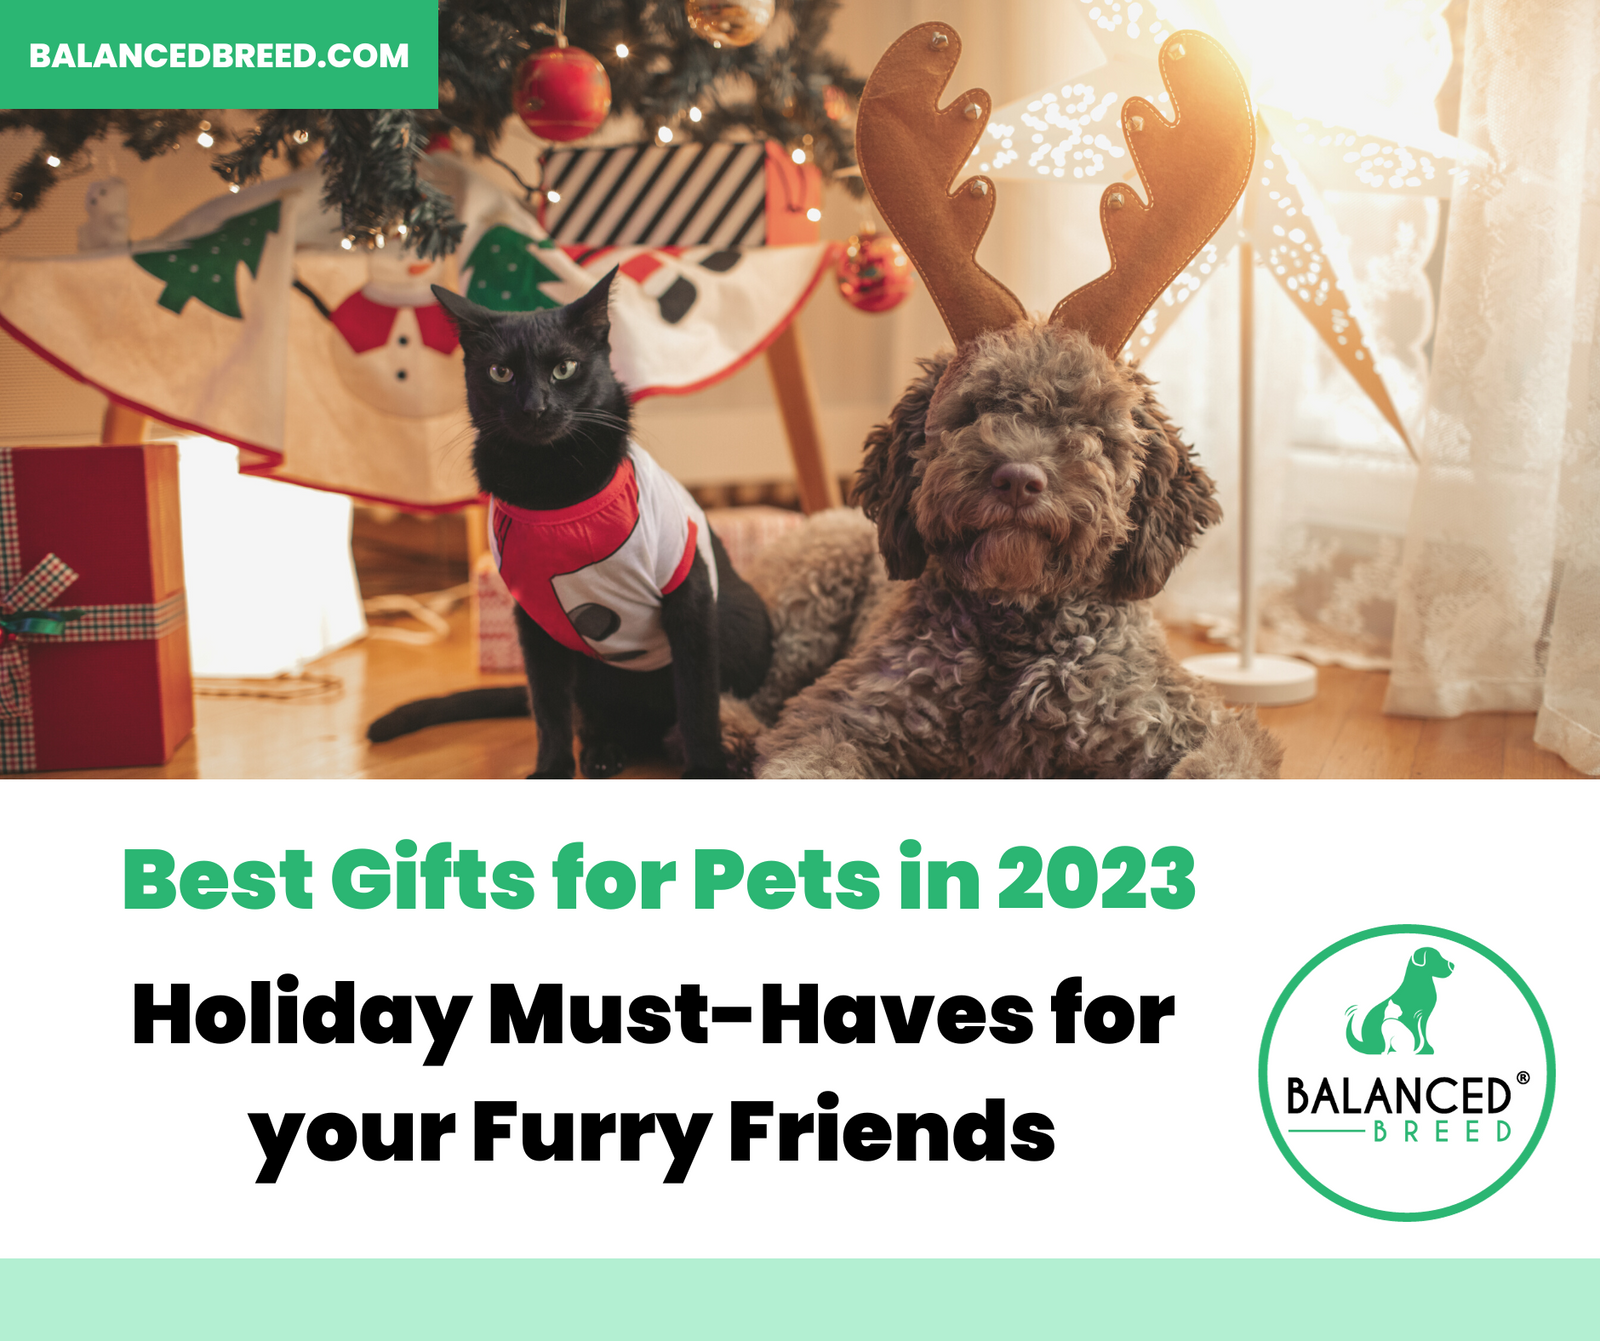 Best Gifts for Pets for the holidays in 2023